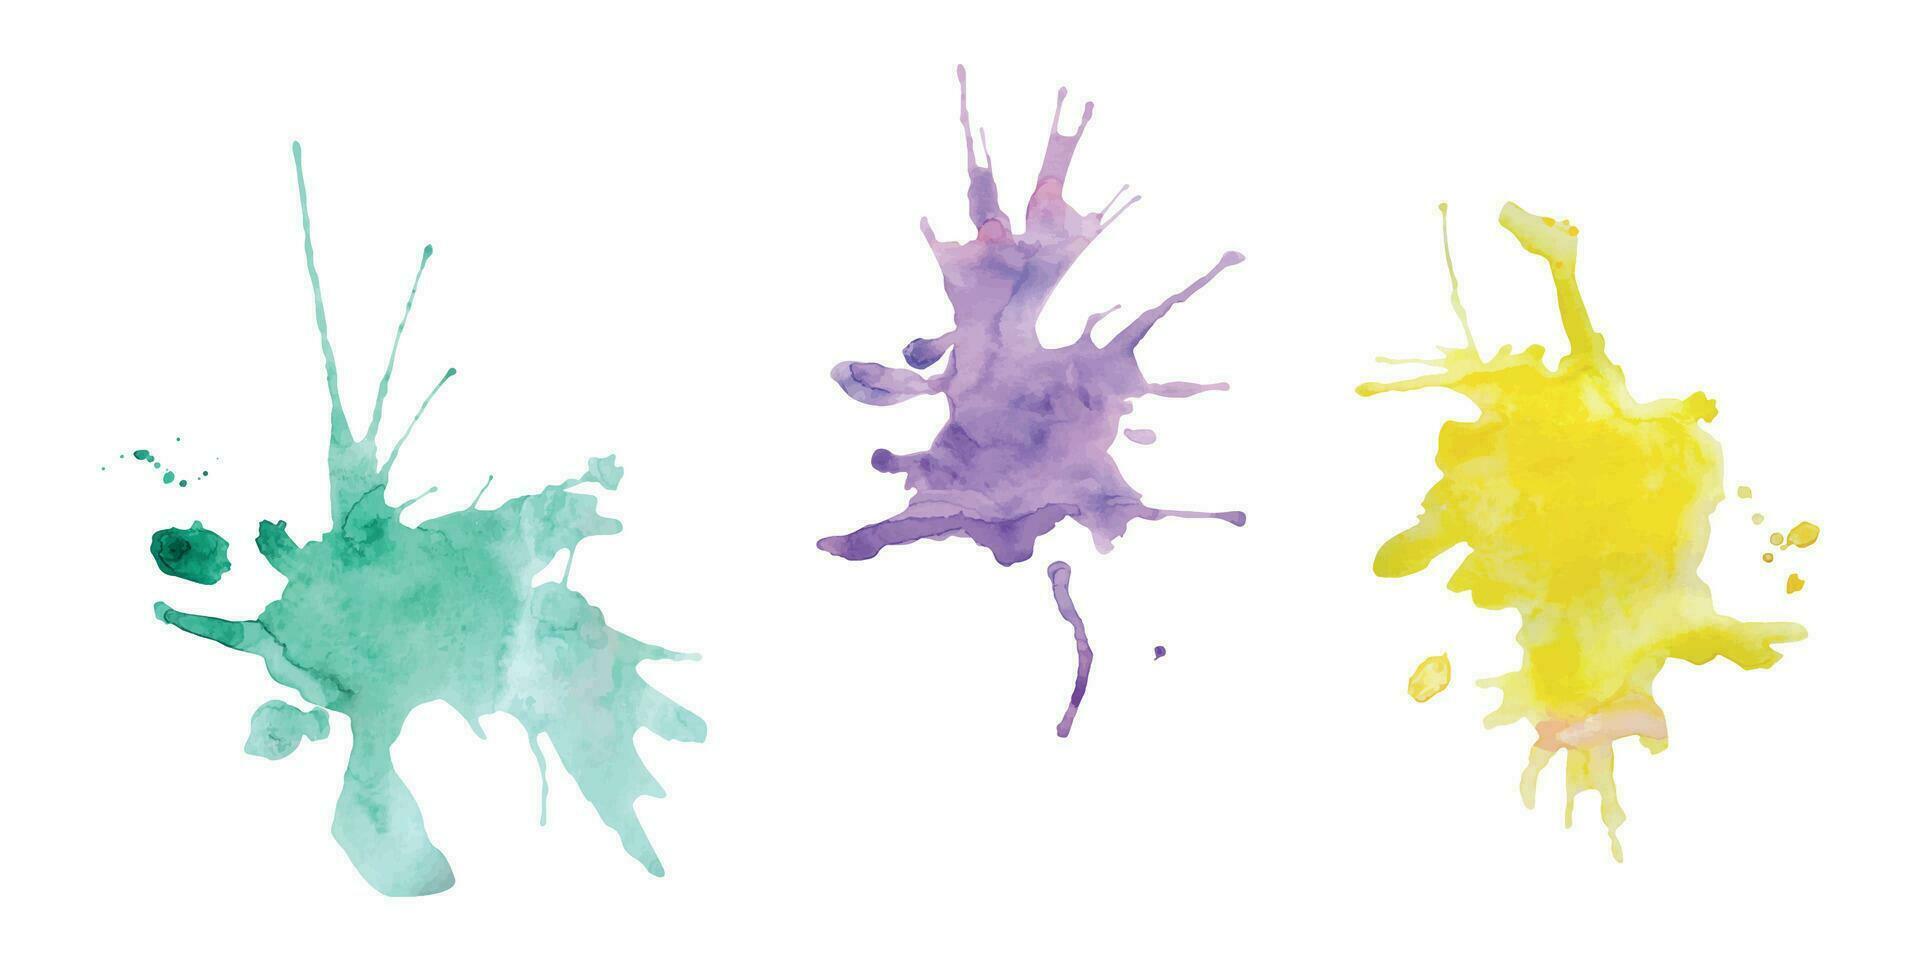 Watercolor hand drawn illustration, painting purple violet, green, yellow color splash stain splatter. Single object isolated on white. For school, kindergarten, party, cards, website, artist, shop vector